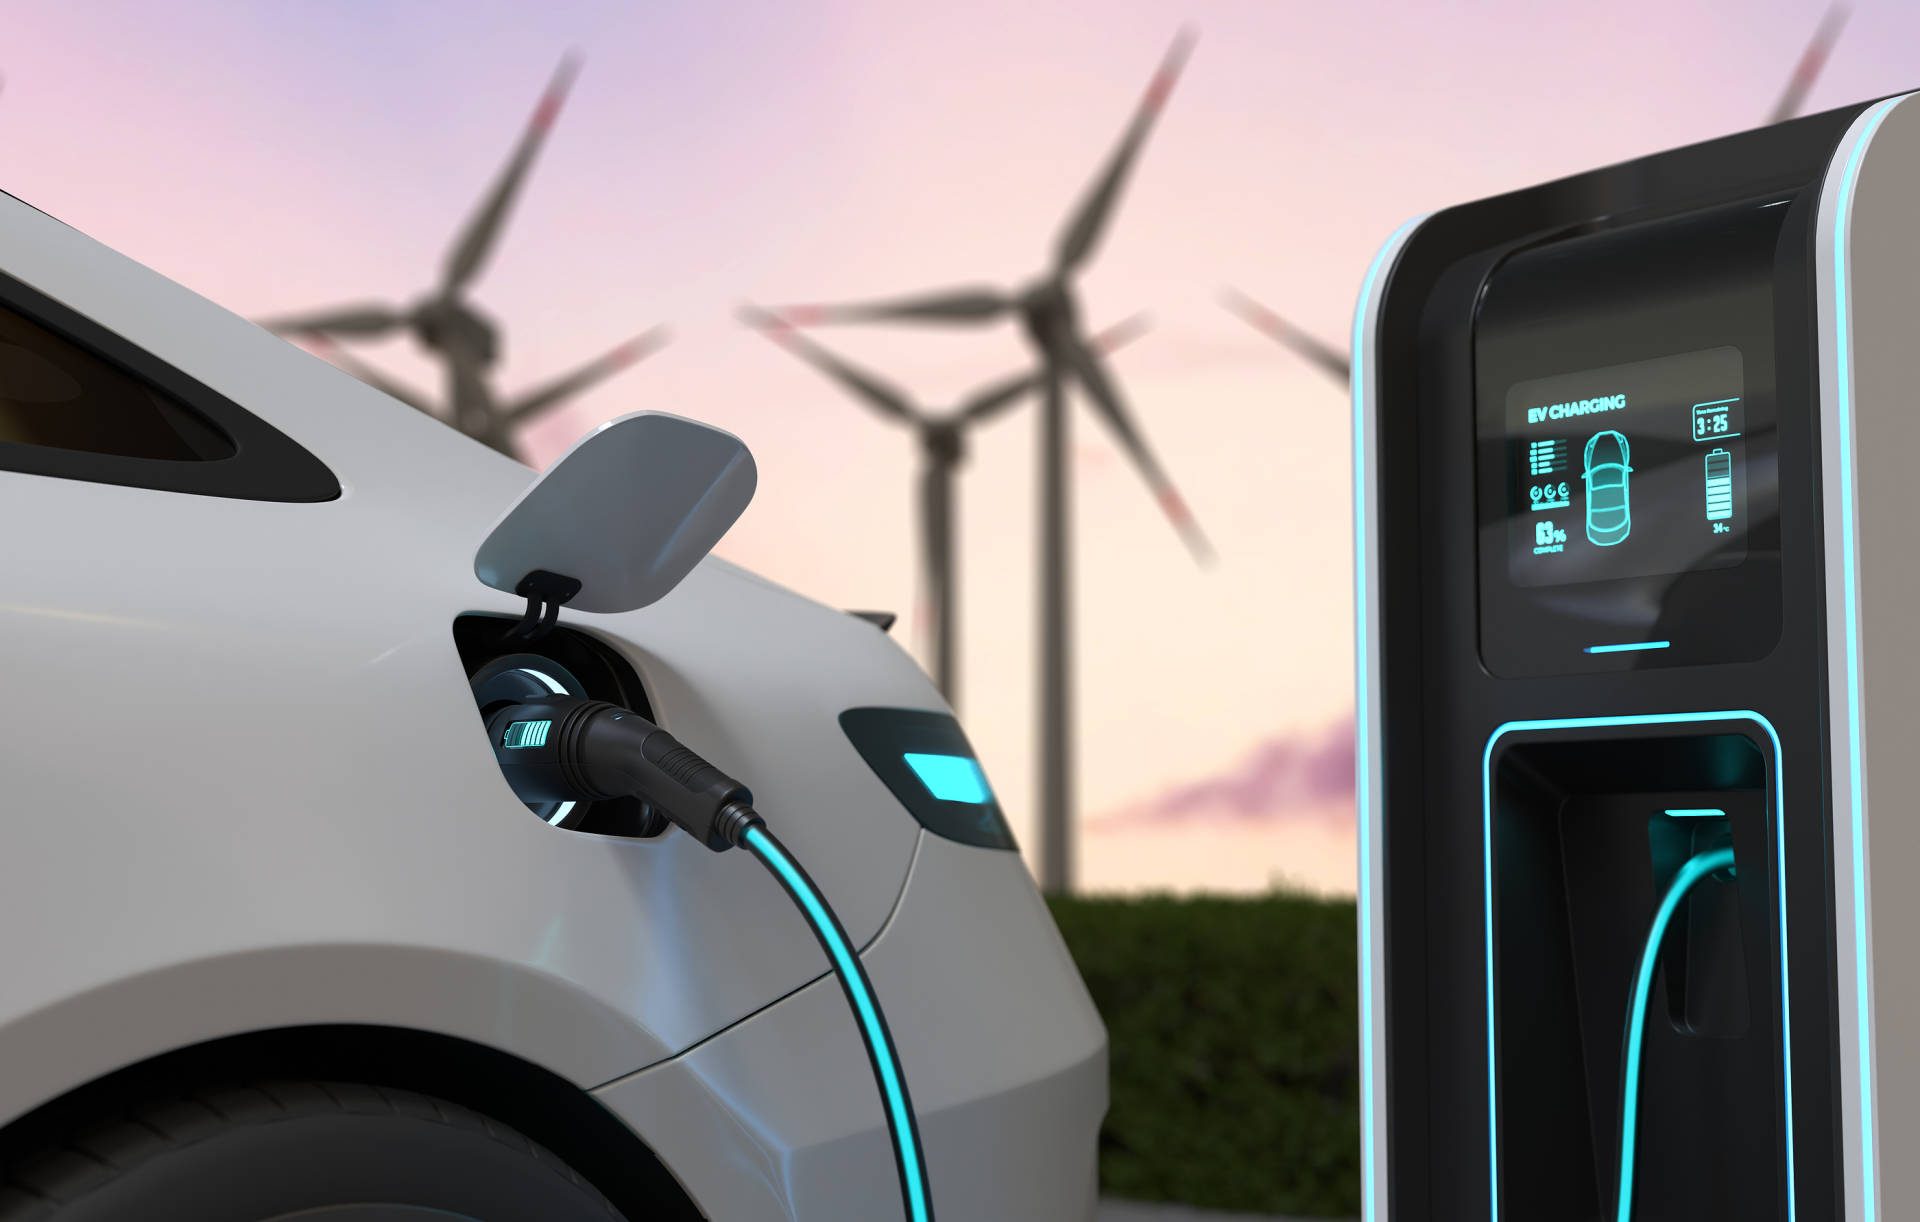 Future-proof your EV fleet with an energy expert - Main media